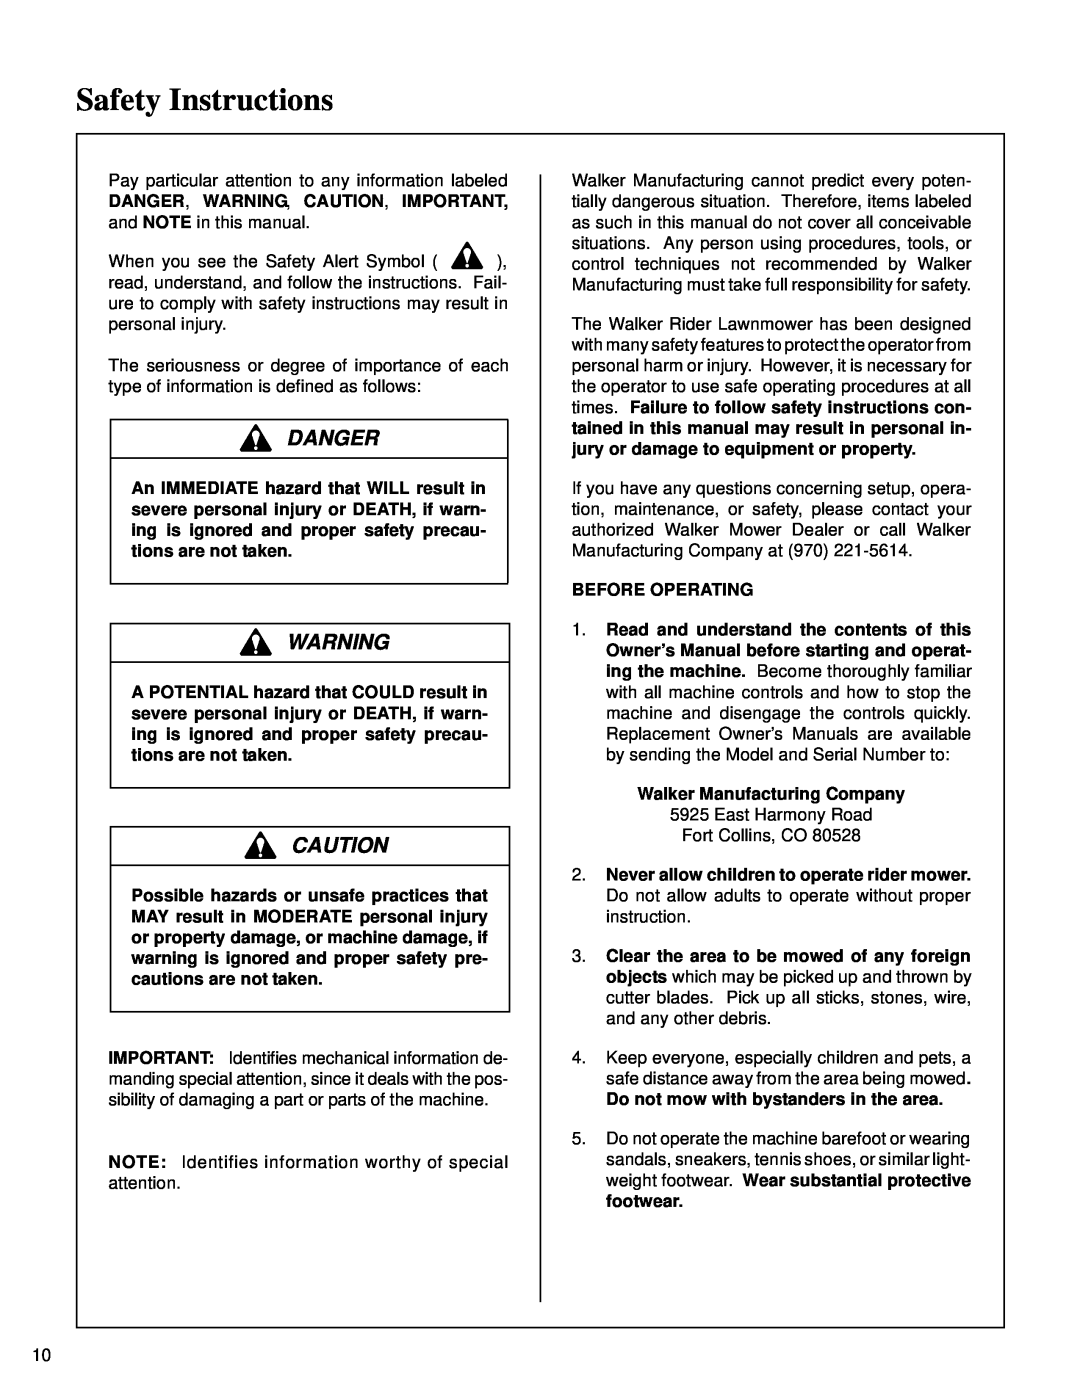 Walker MT Safety Instructions, Danger, DANGER, WARNING, CAUTION, IMPORTANT, and NOTE in this manual, Before Operating 